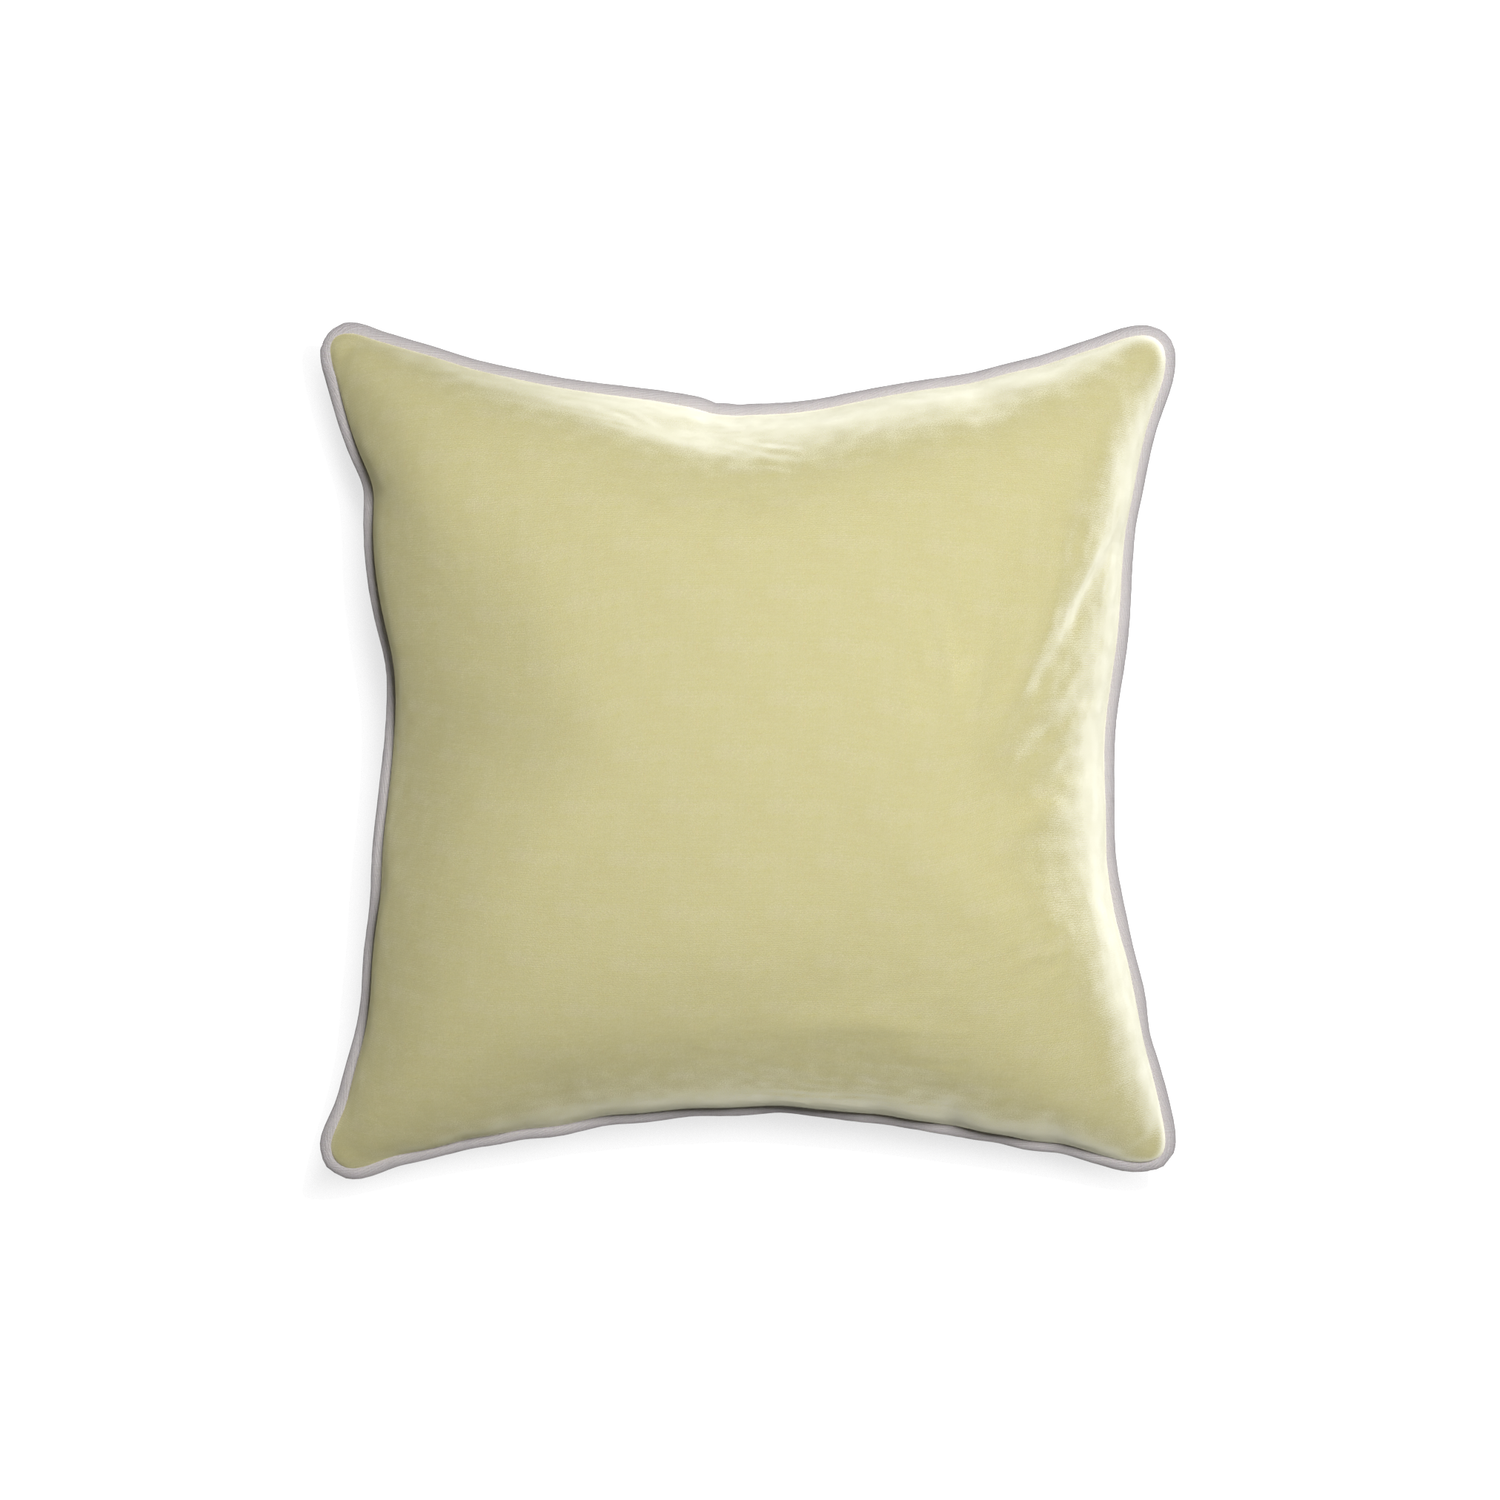 18-square pear velvet custom light greenpillow with pebble piping on white background